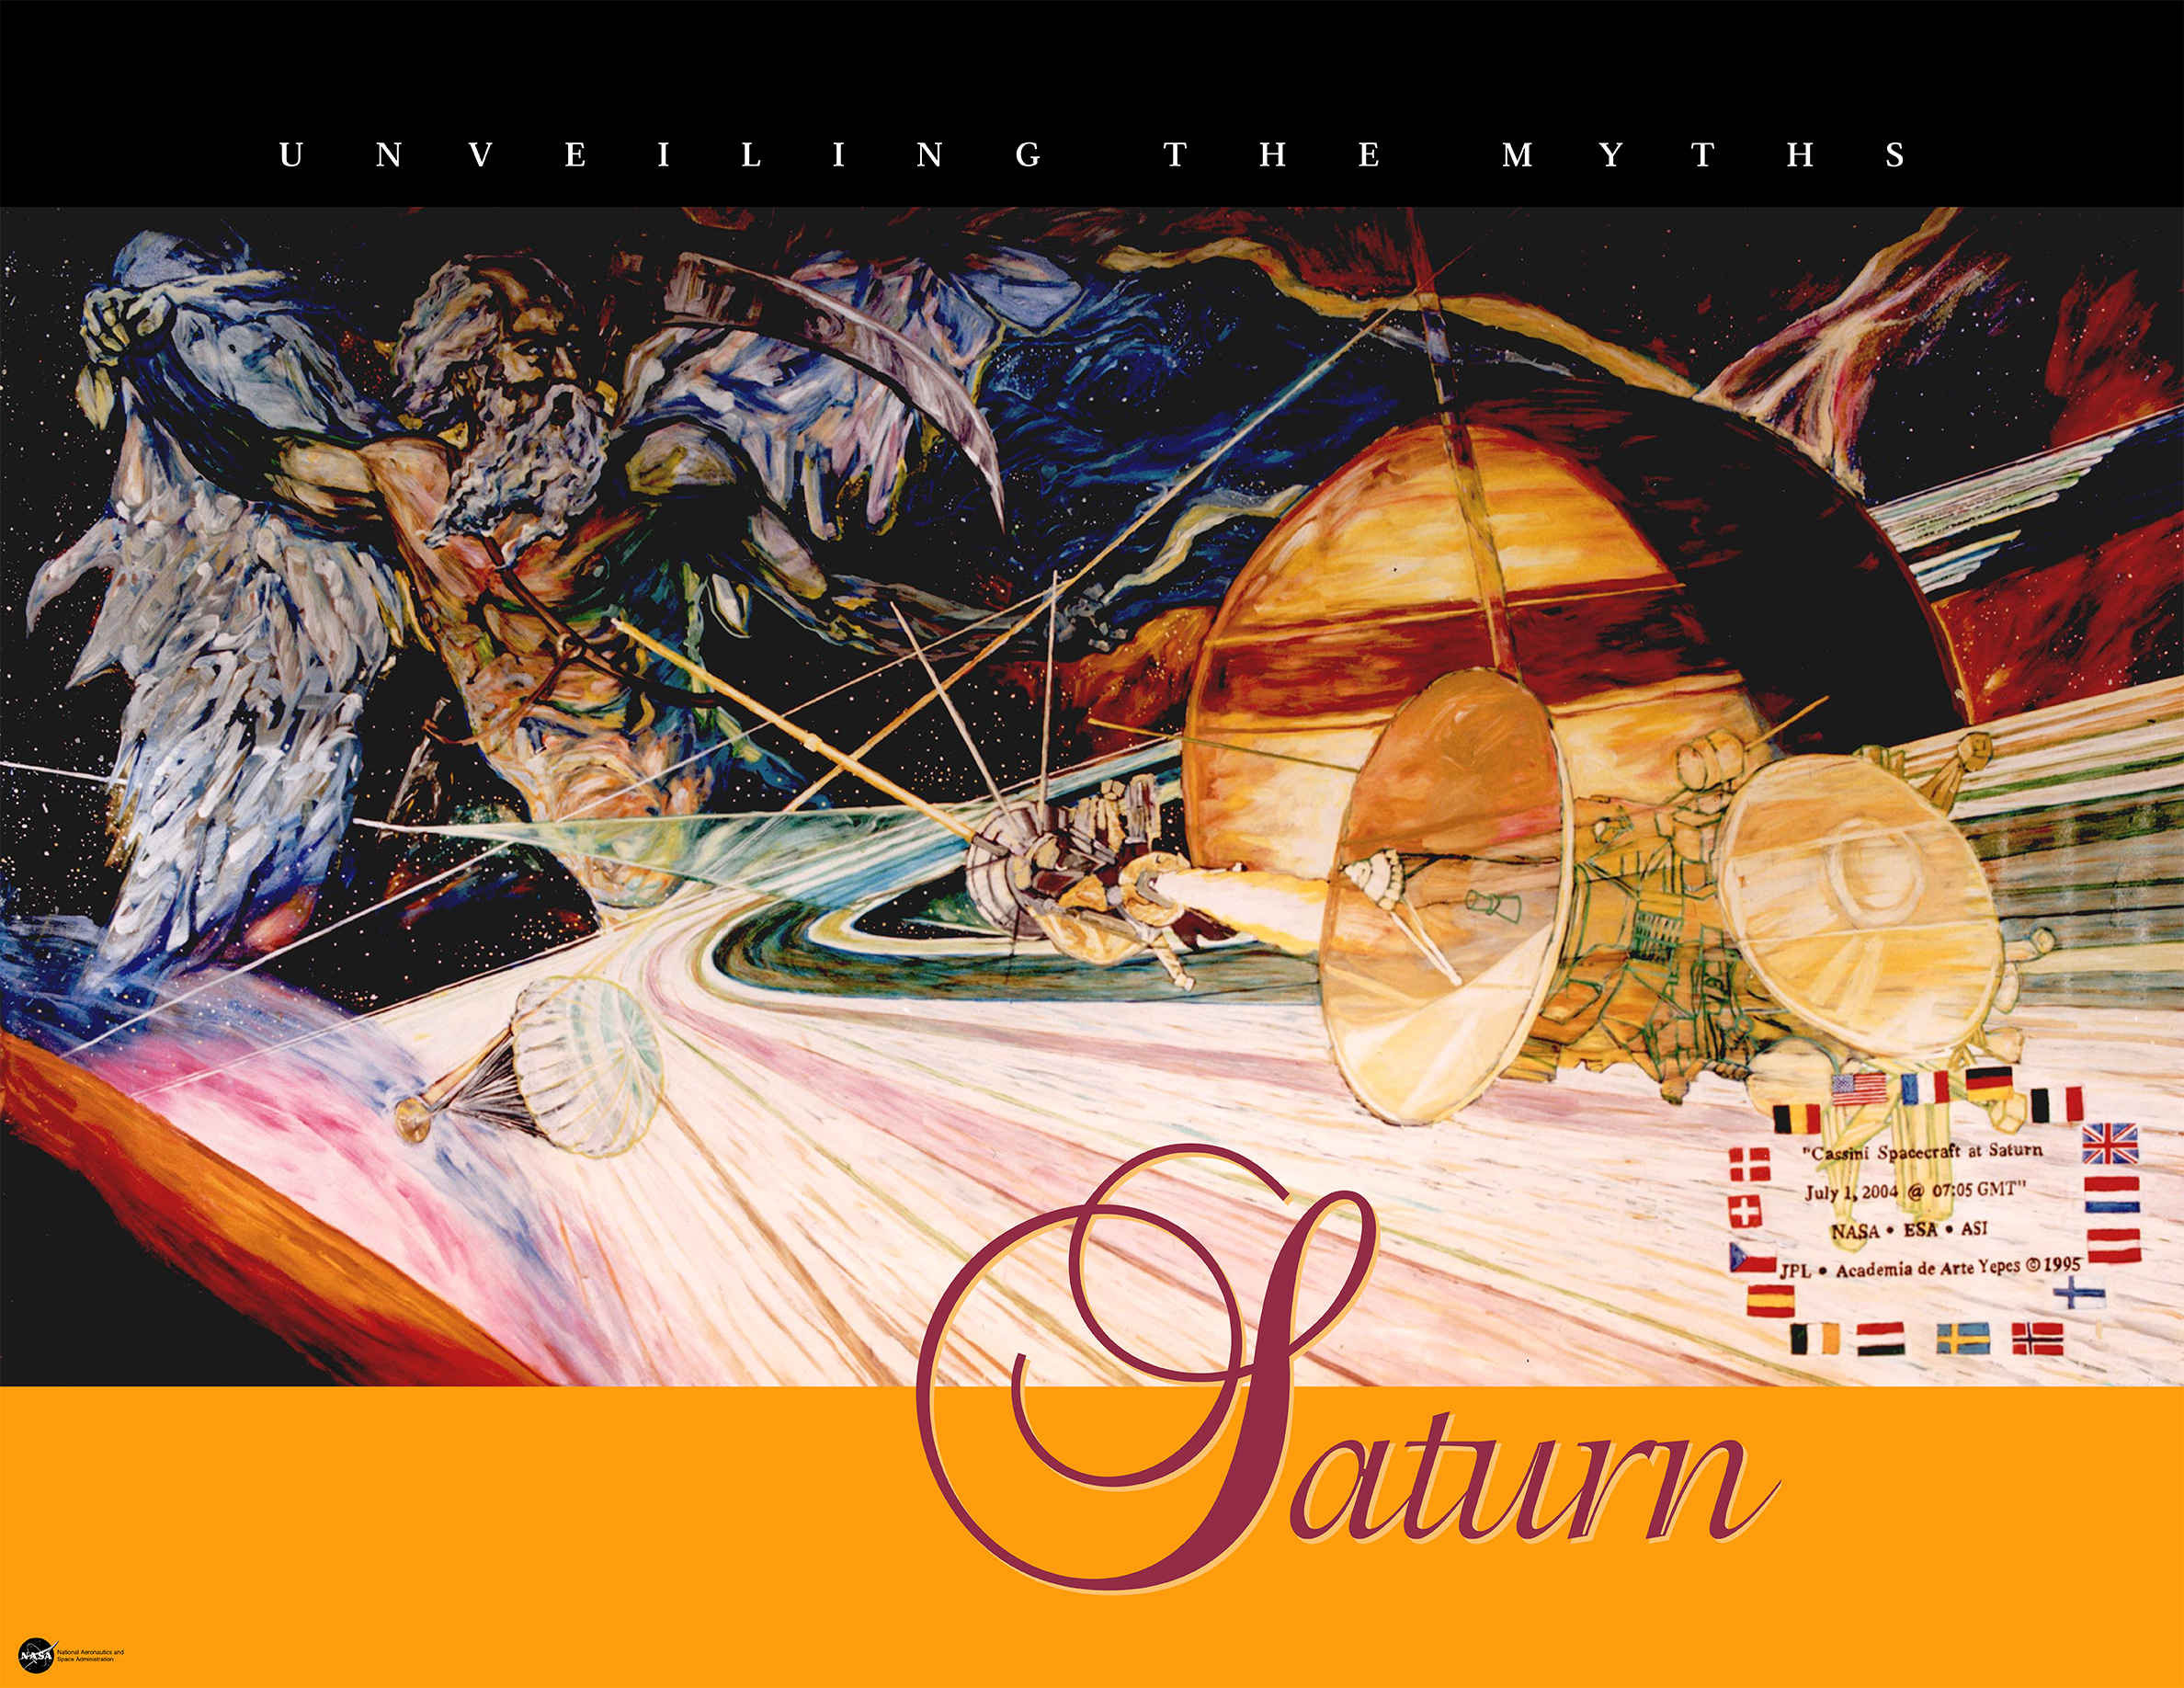 This poster depicts the mythological story of Saturn combined with images of space exploration.